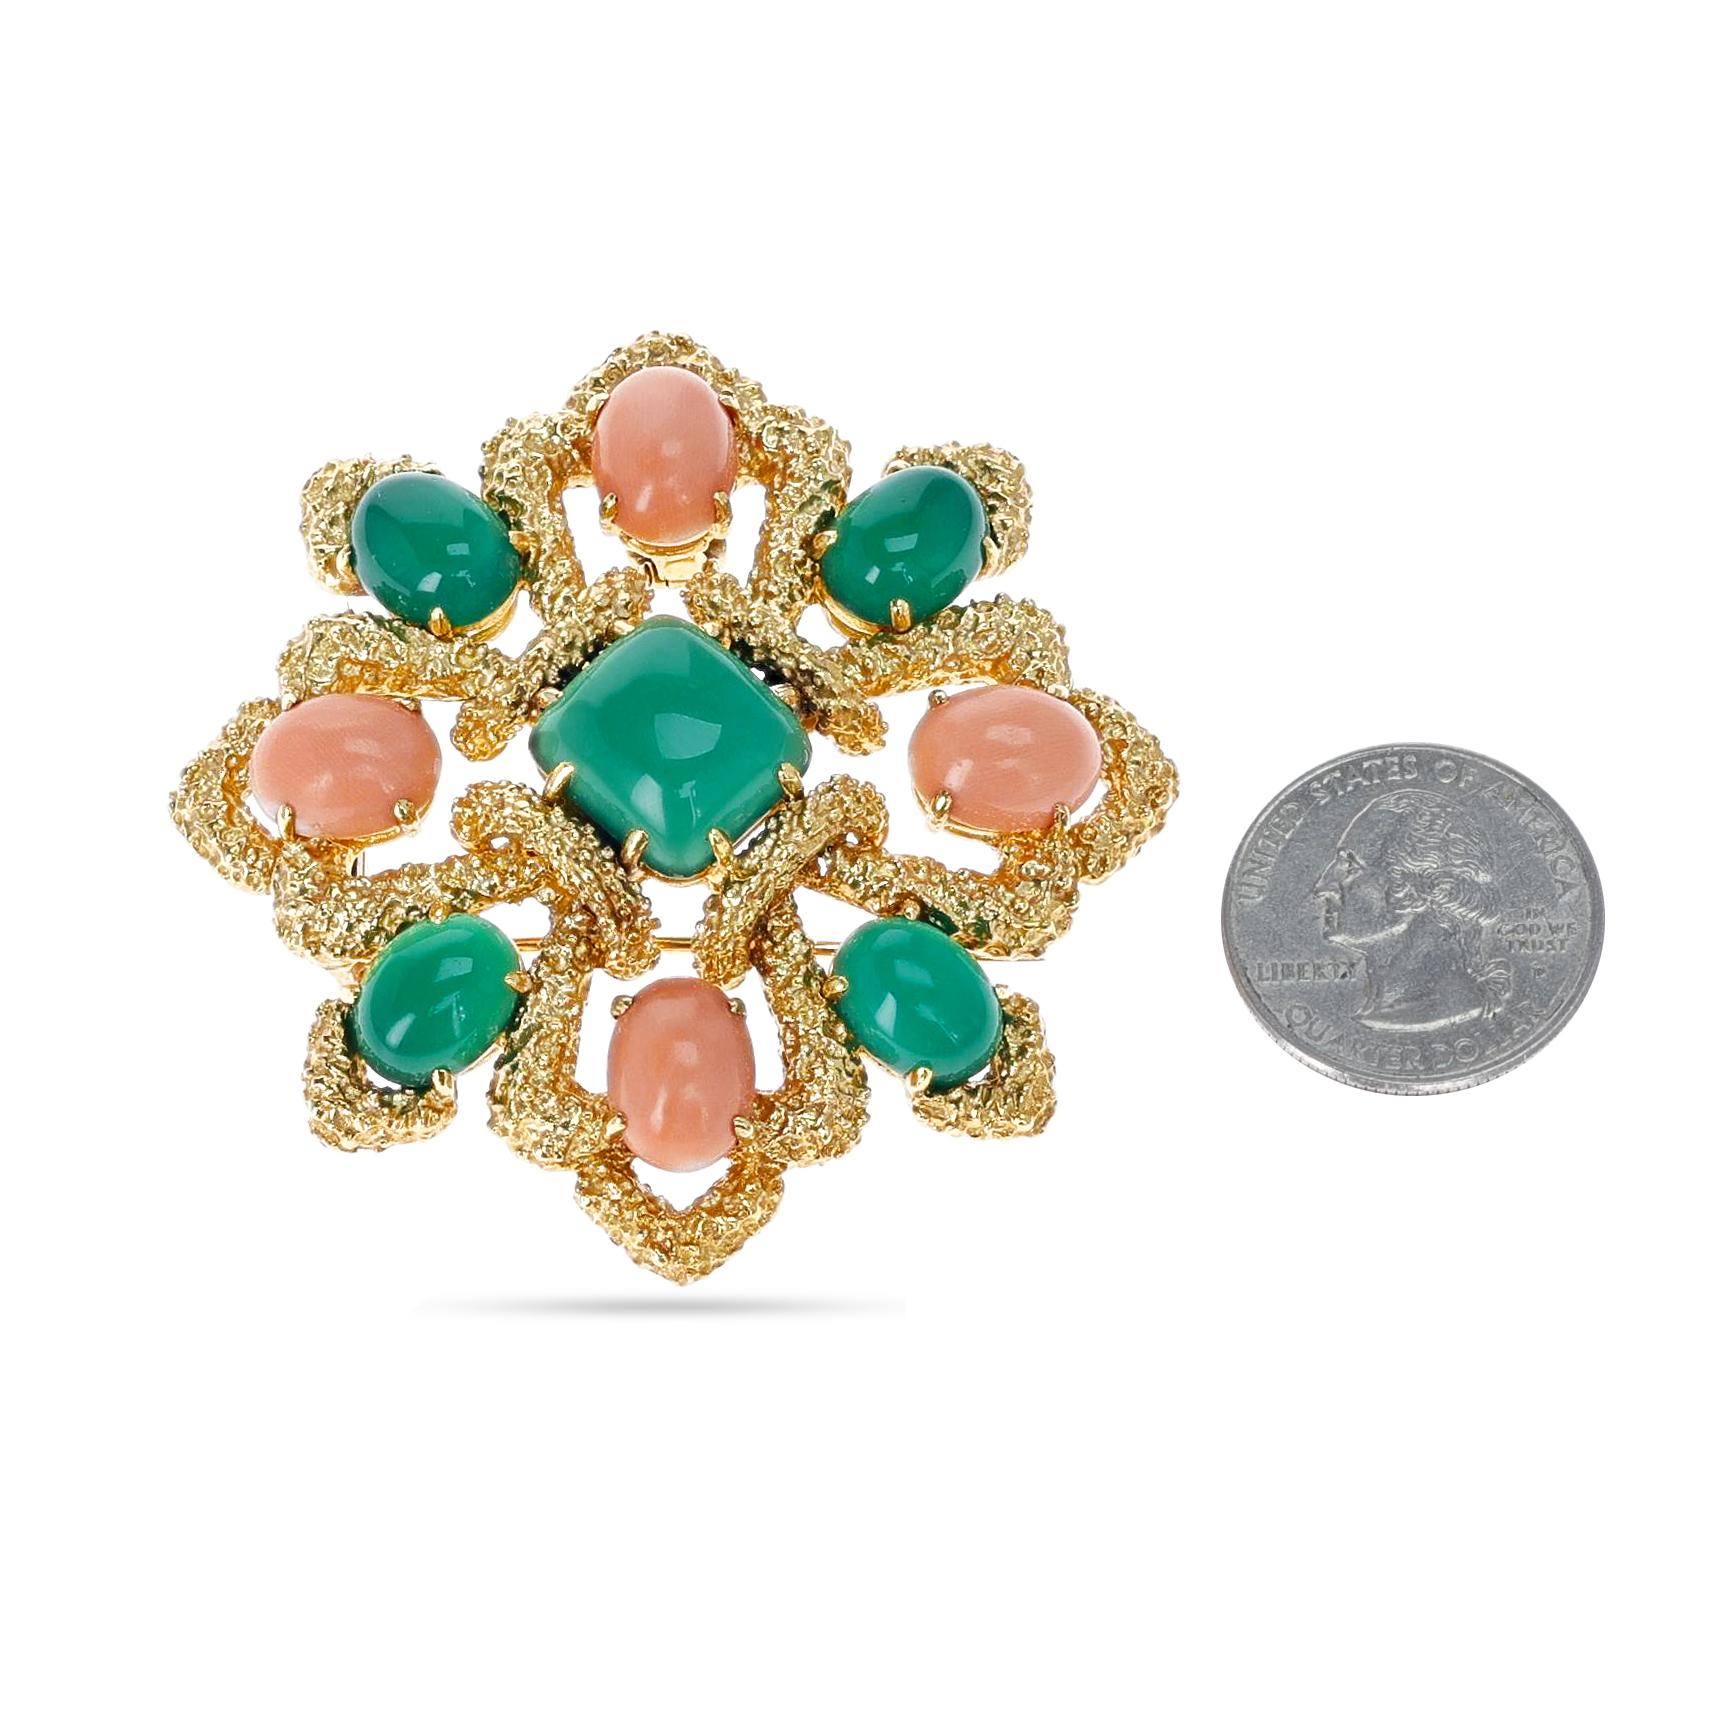 Van Cleef & Arpels Chrysoprase and Coral Cabochon Brooch, 18K Yellow Gold For Sale 1